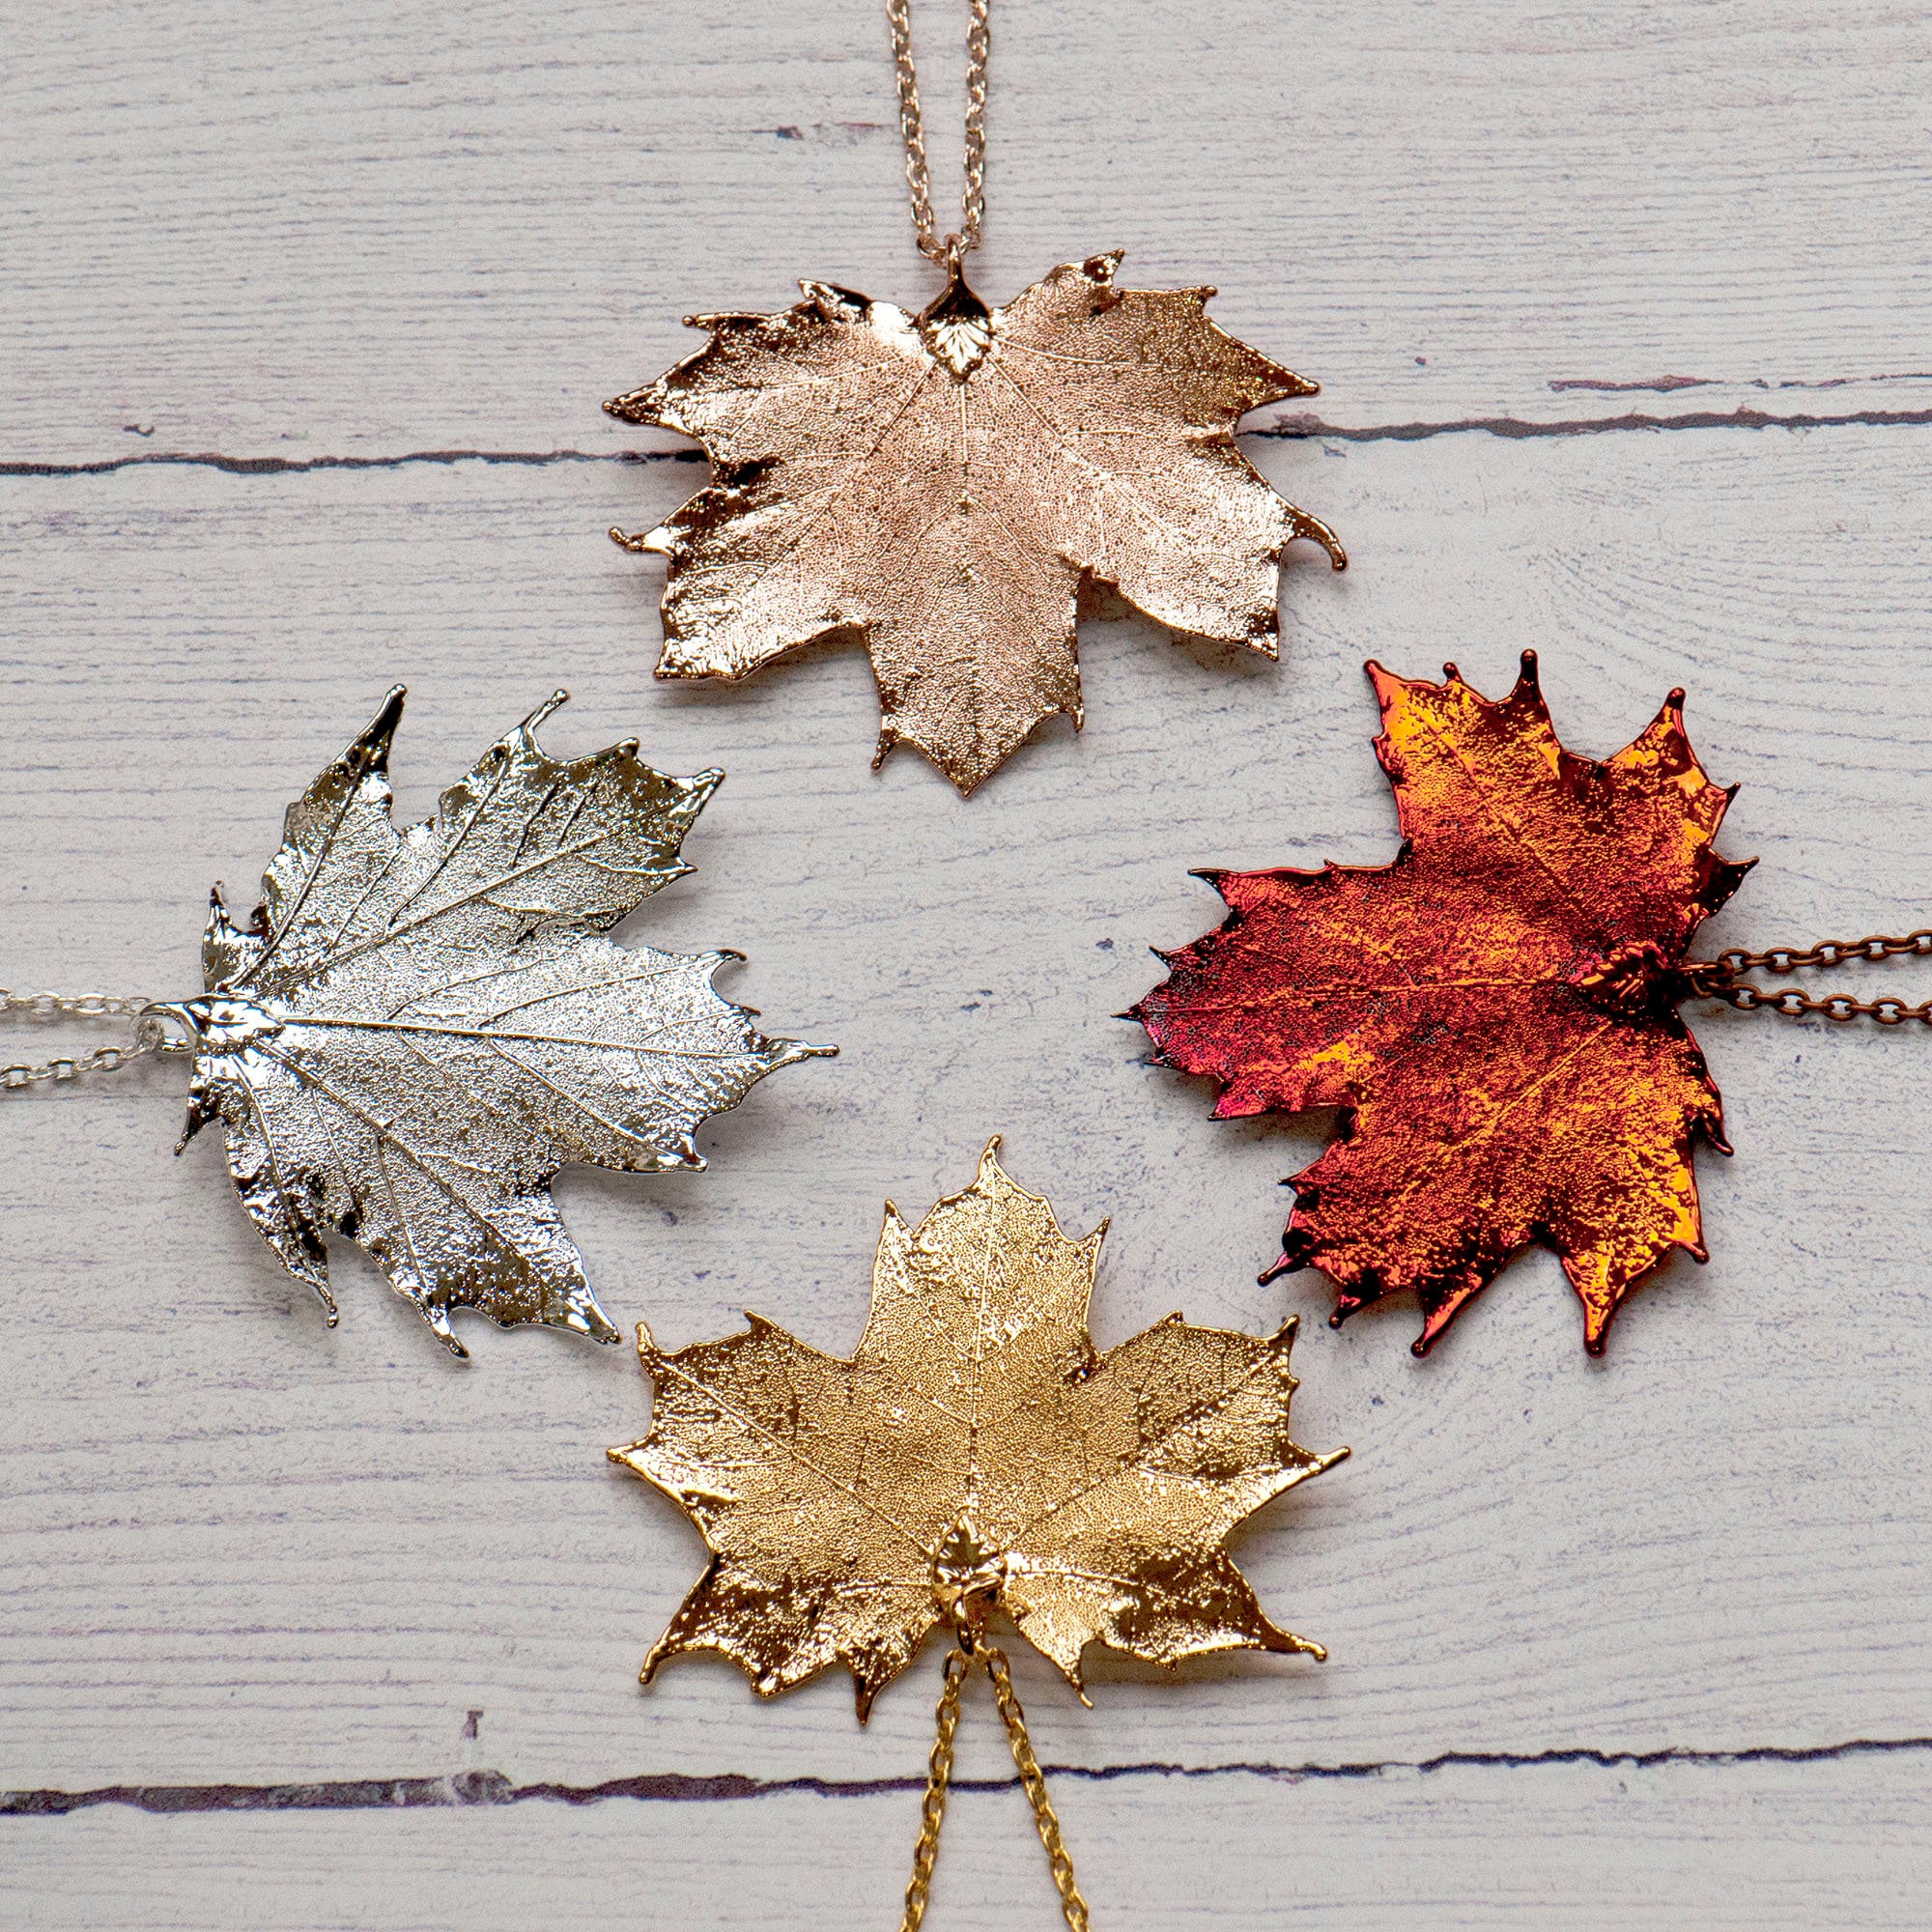 Canadian Maple Leaf Necklace Autumn Leaf Jewelry Real Leaf   Etsy 日本